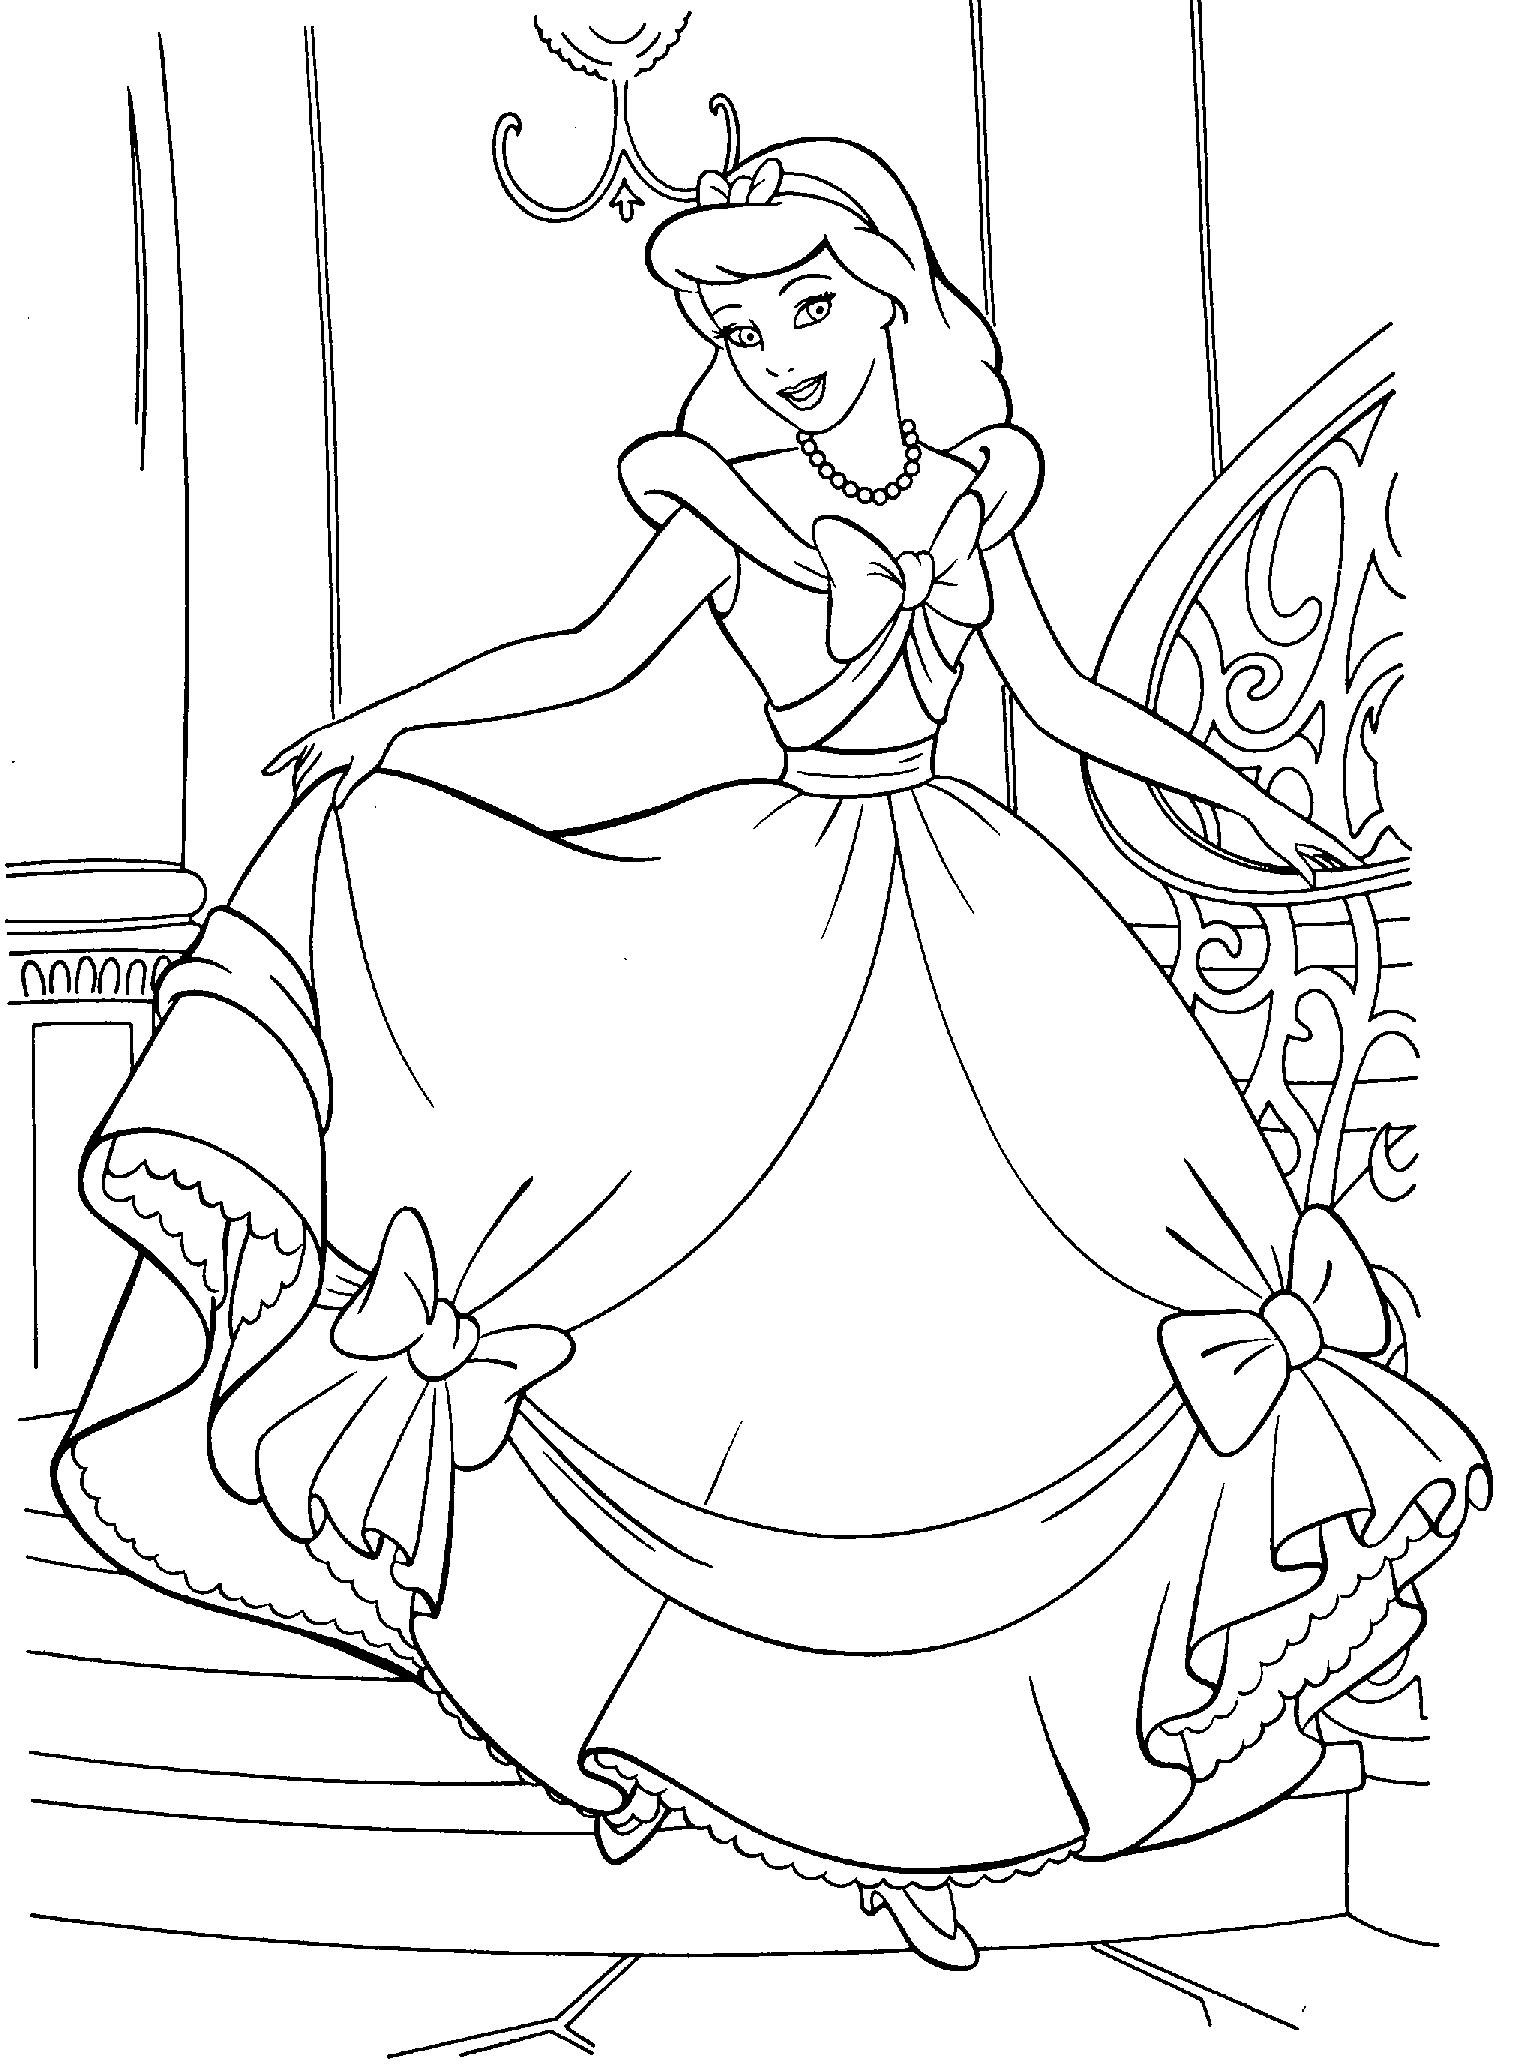 cinderella colouring pages free free printable cinderella coloring pages for kids cool2bkids free pages cinderella colouring 